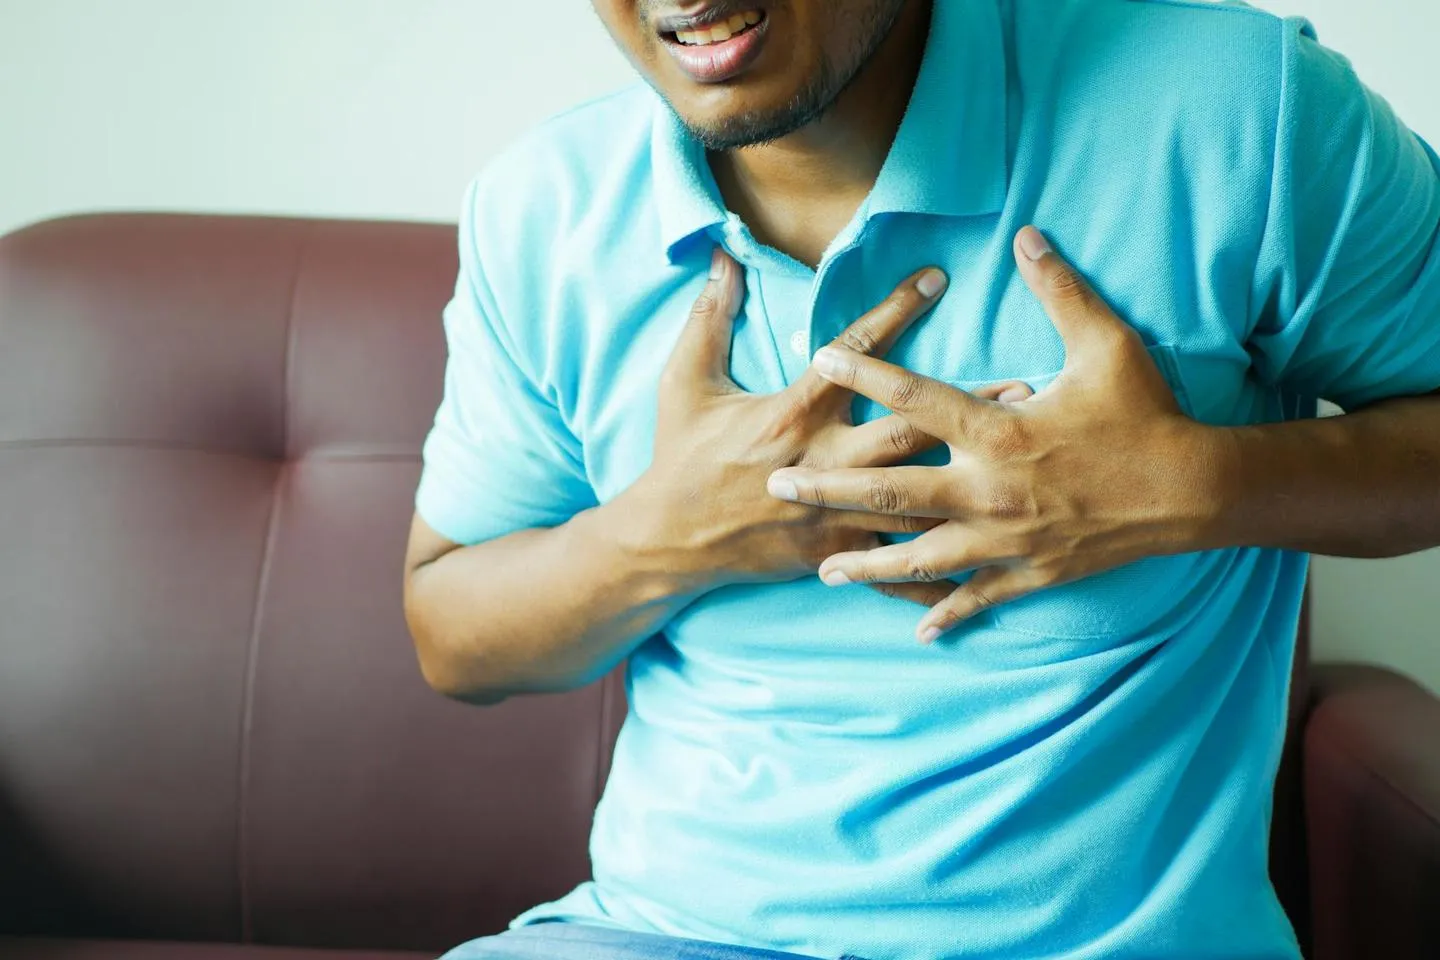 A man holding his chest while suffering an apparent heart attack